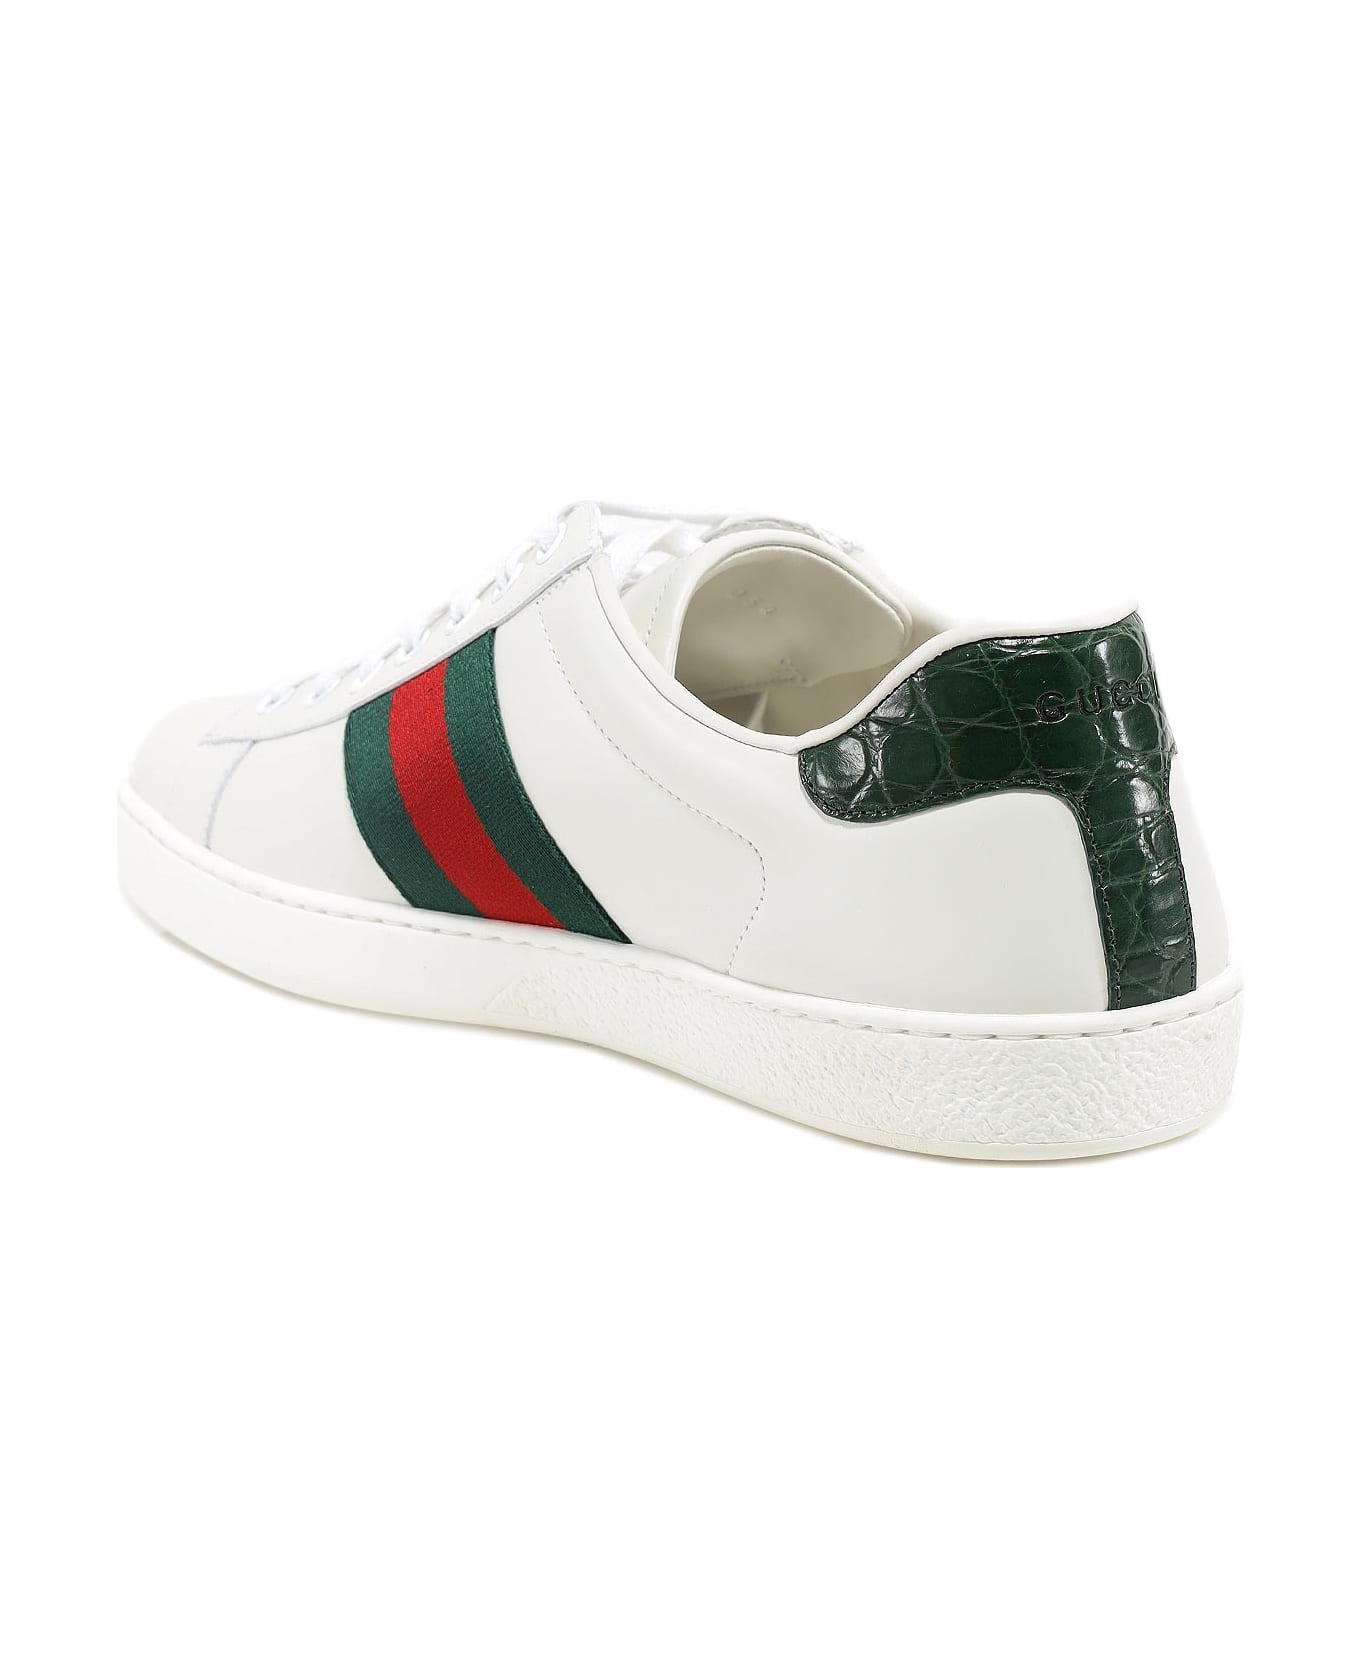 Gucci Ace Leather Sneakers | italist